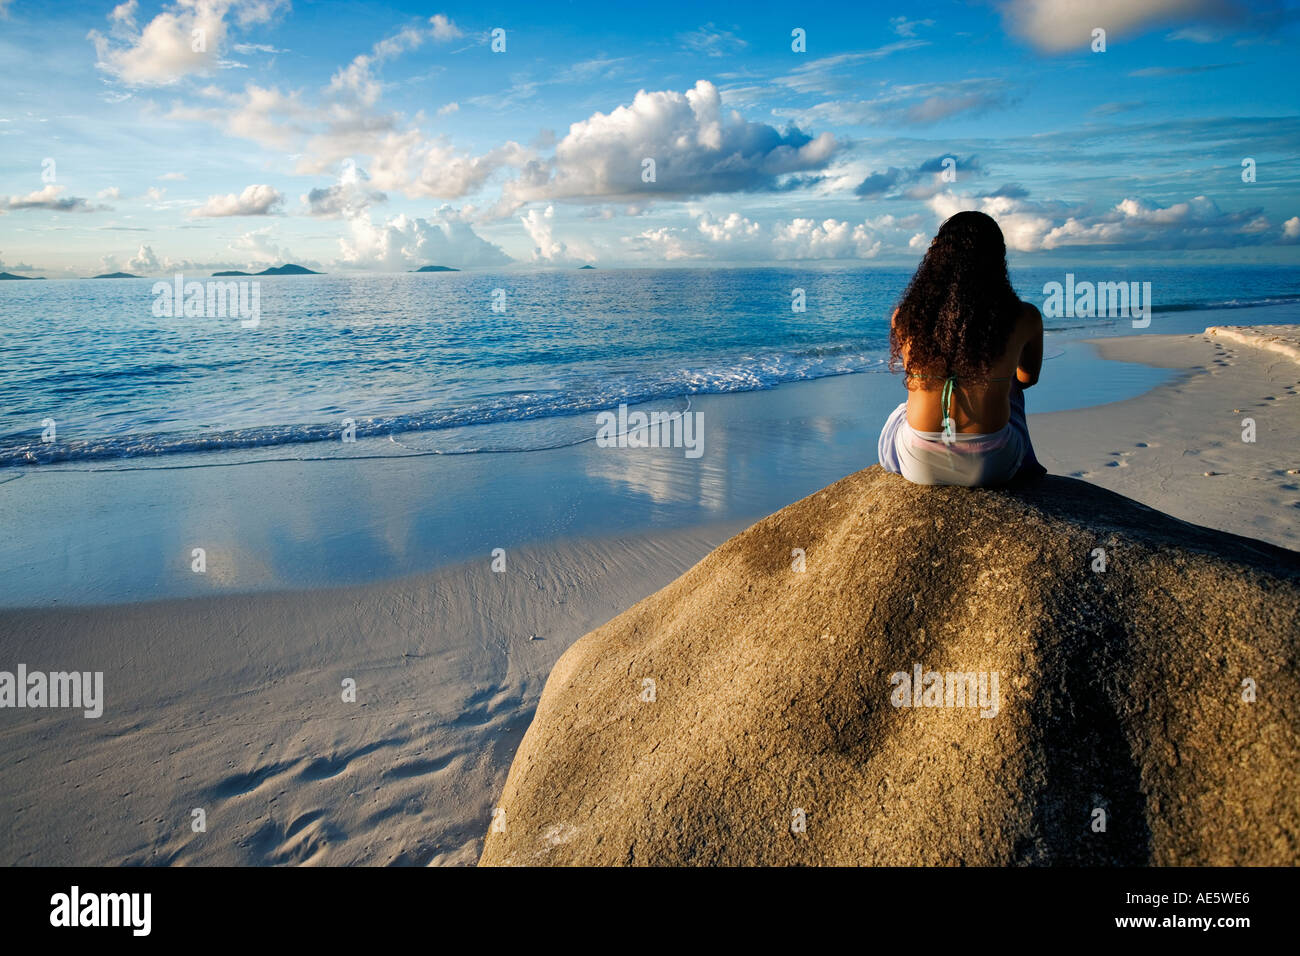 Woman relaxing on beach plage Anse Victorin Fregate Island Seychelles Banque D'Images